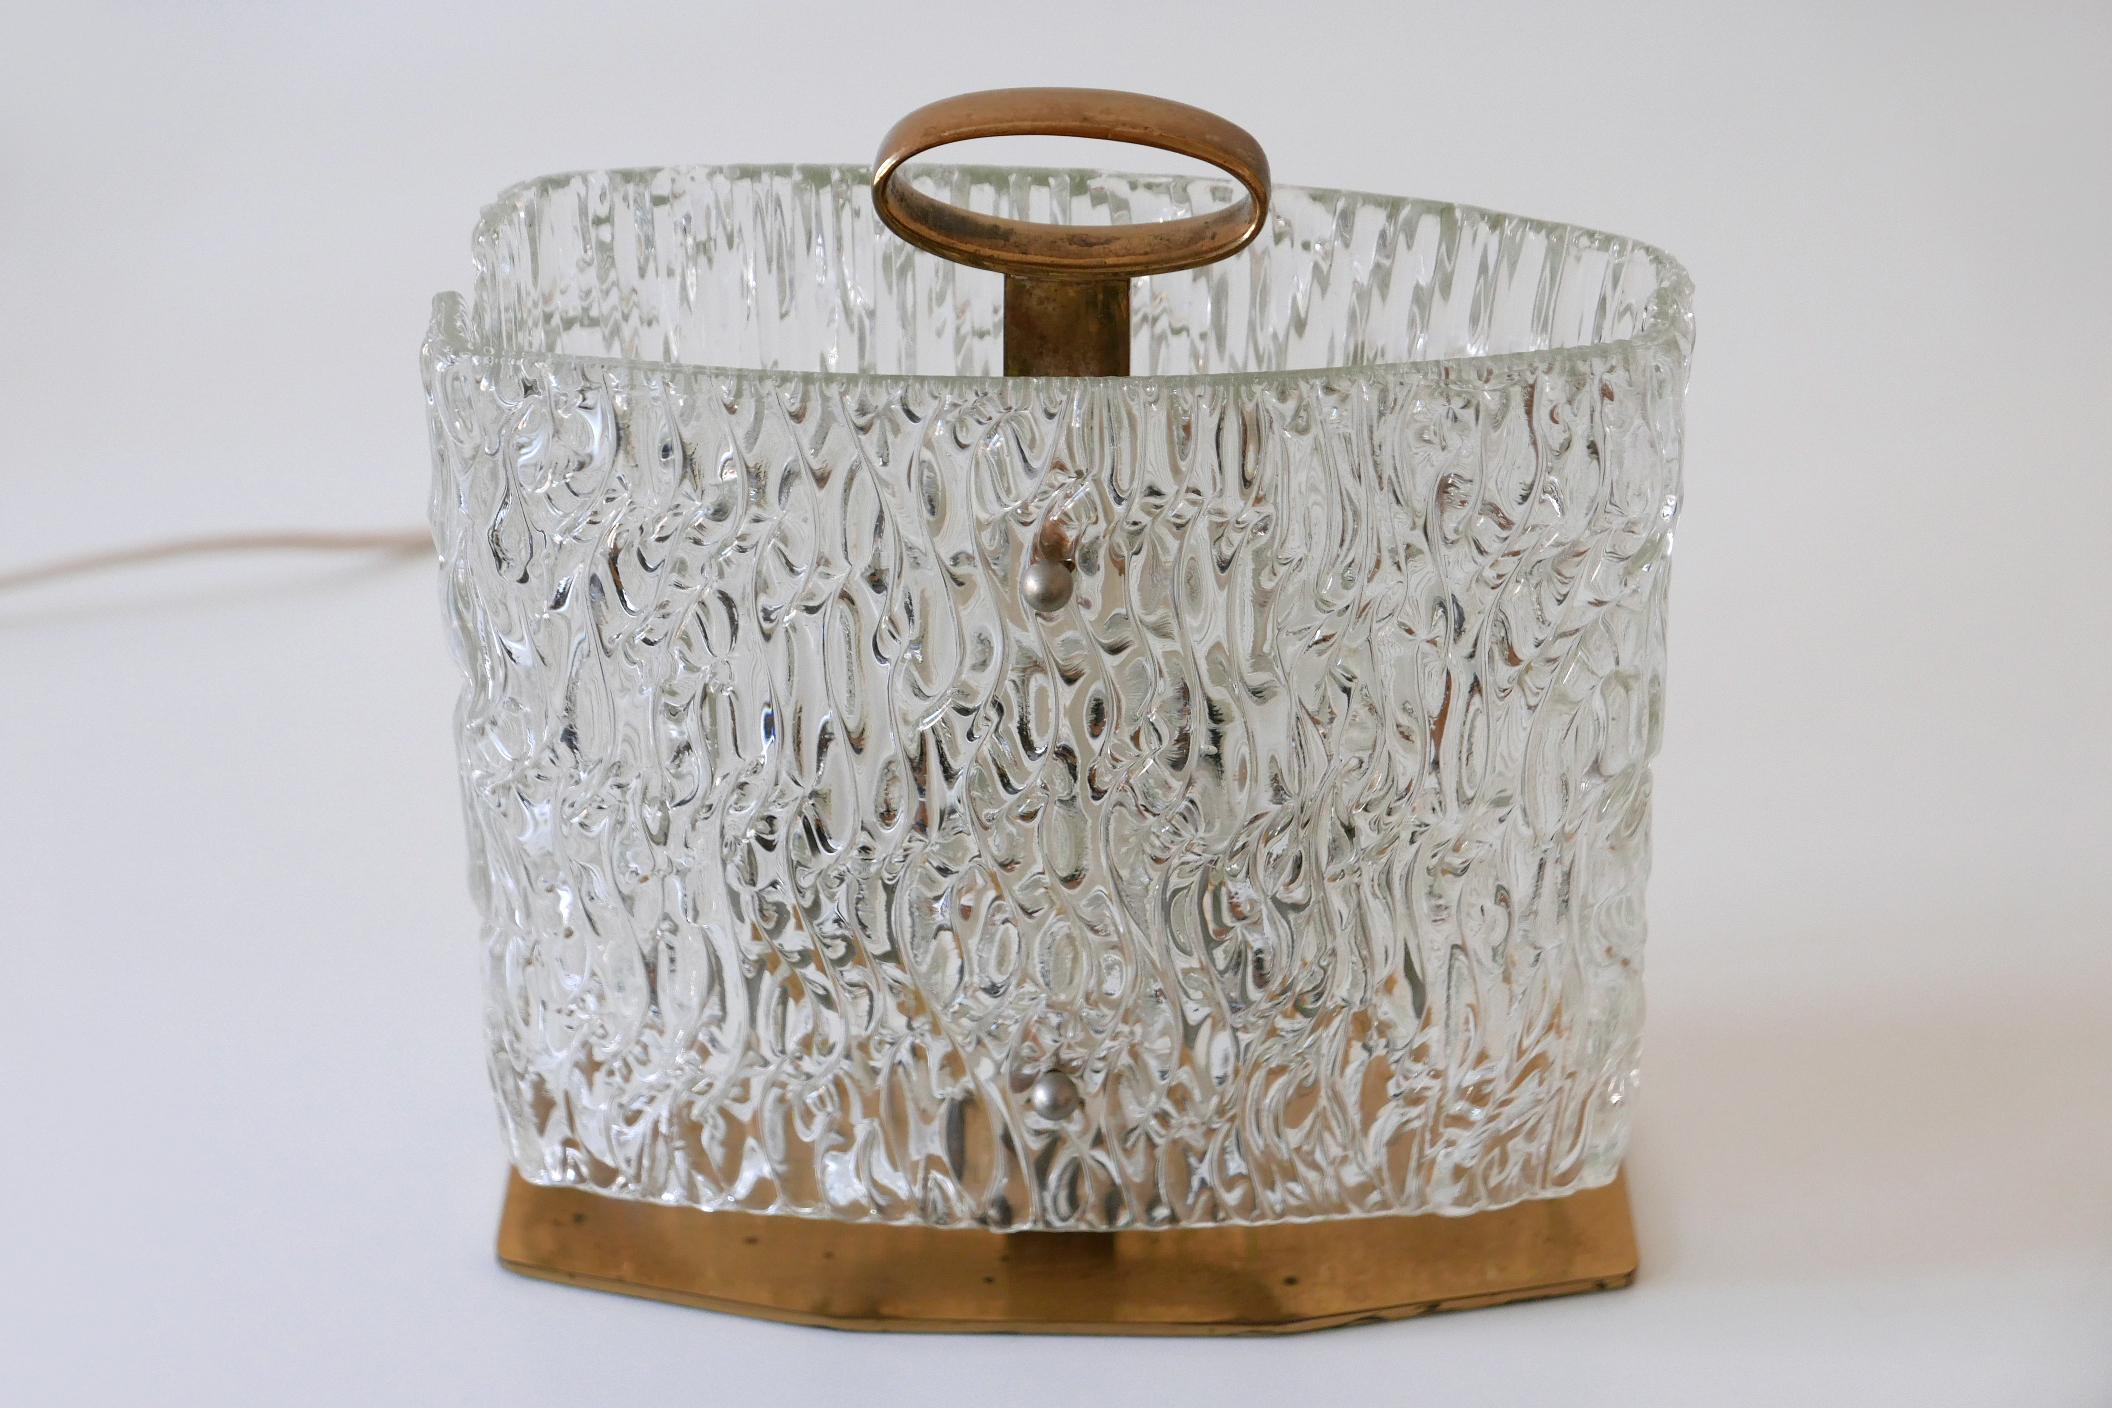 Exceptional Mid-Century Modern Table Lamp with Ice Glass Shade, 1950s, Italy For Sale 8